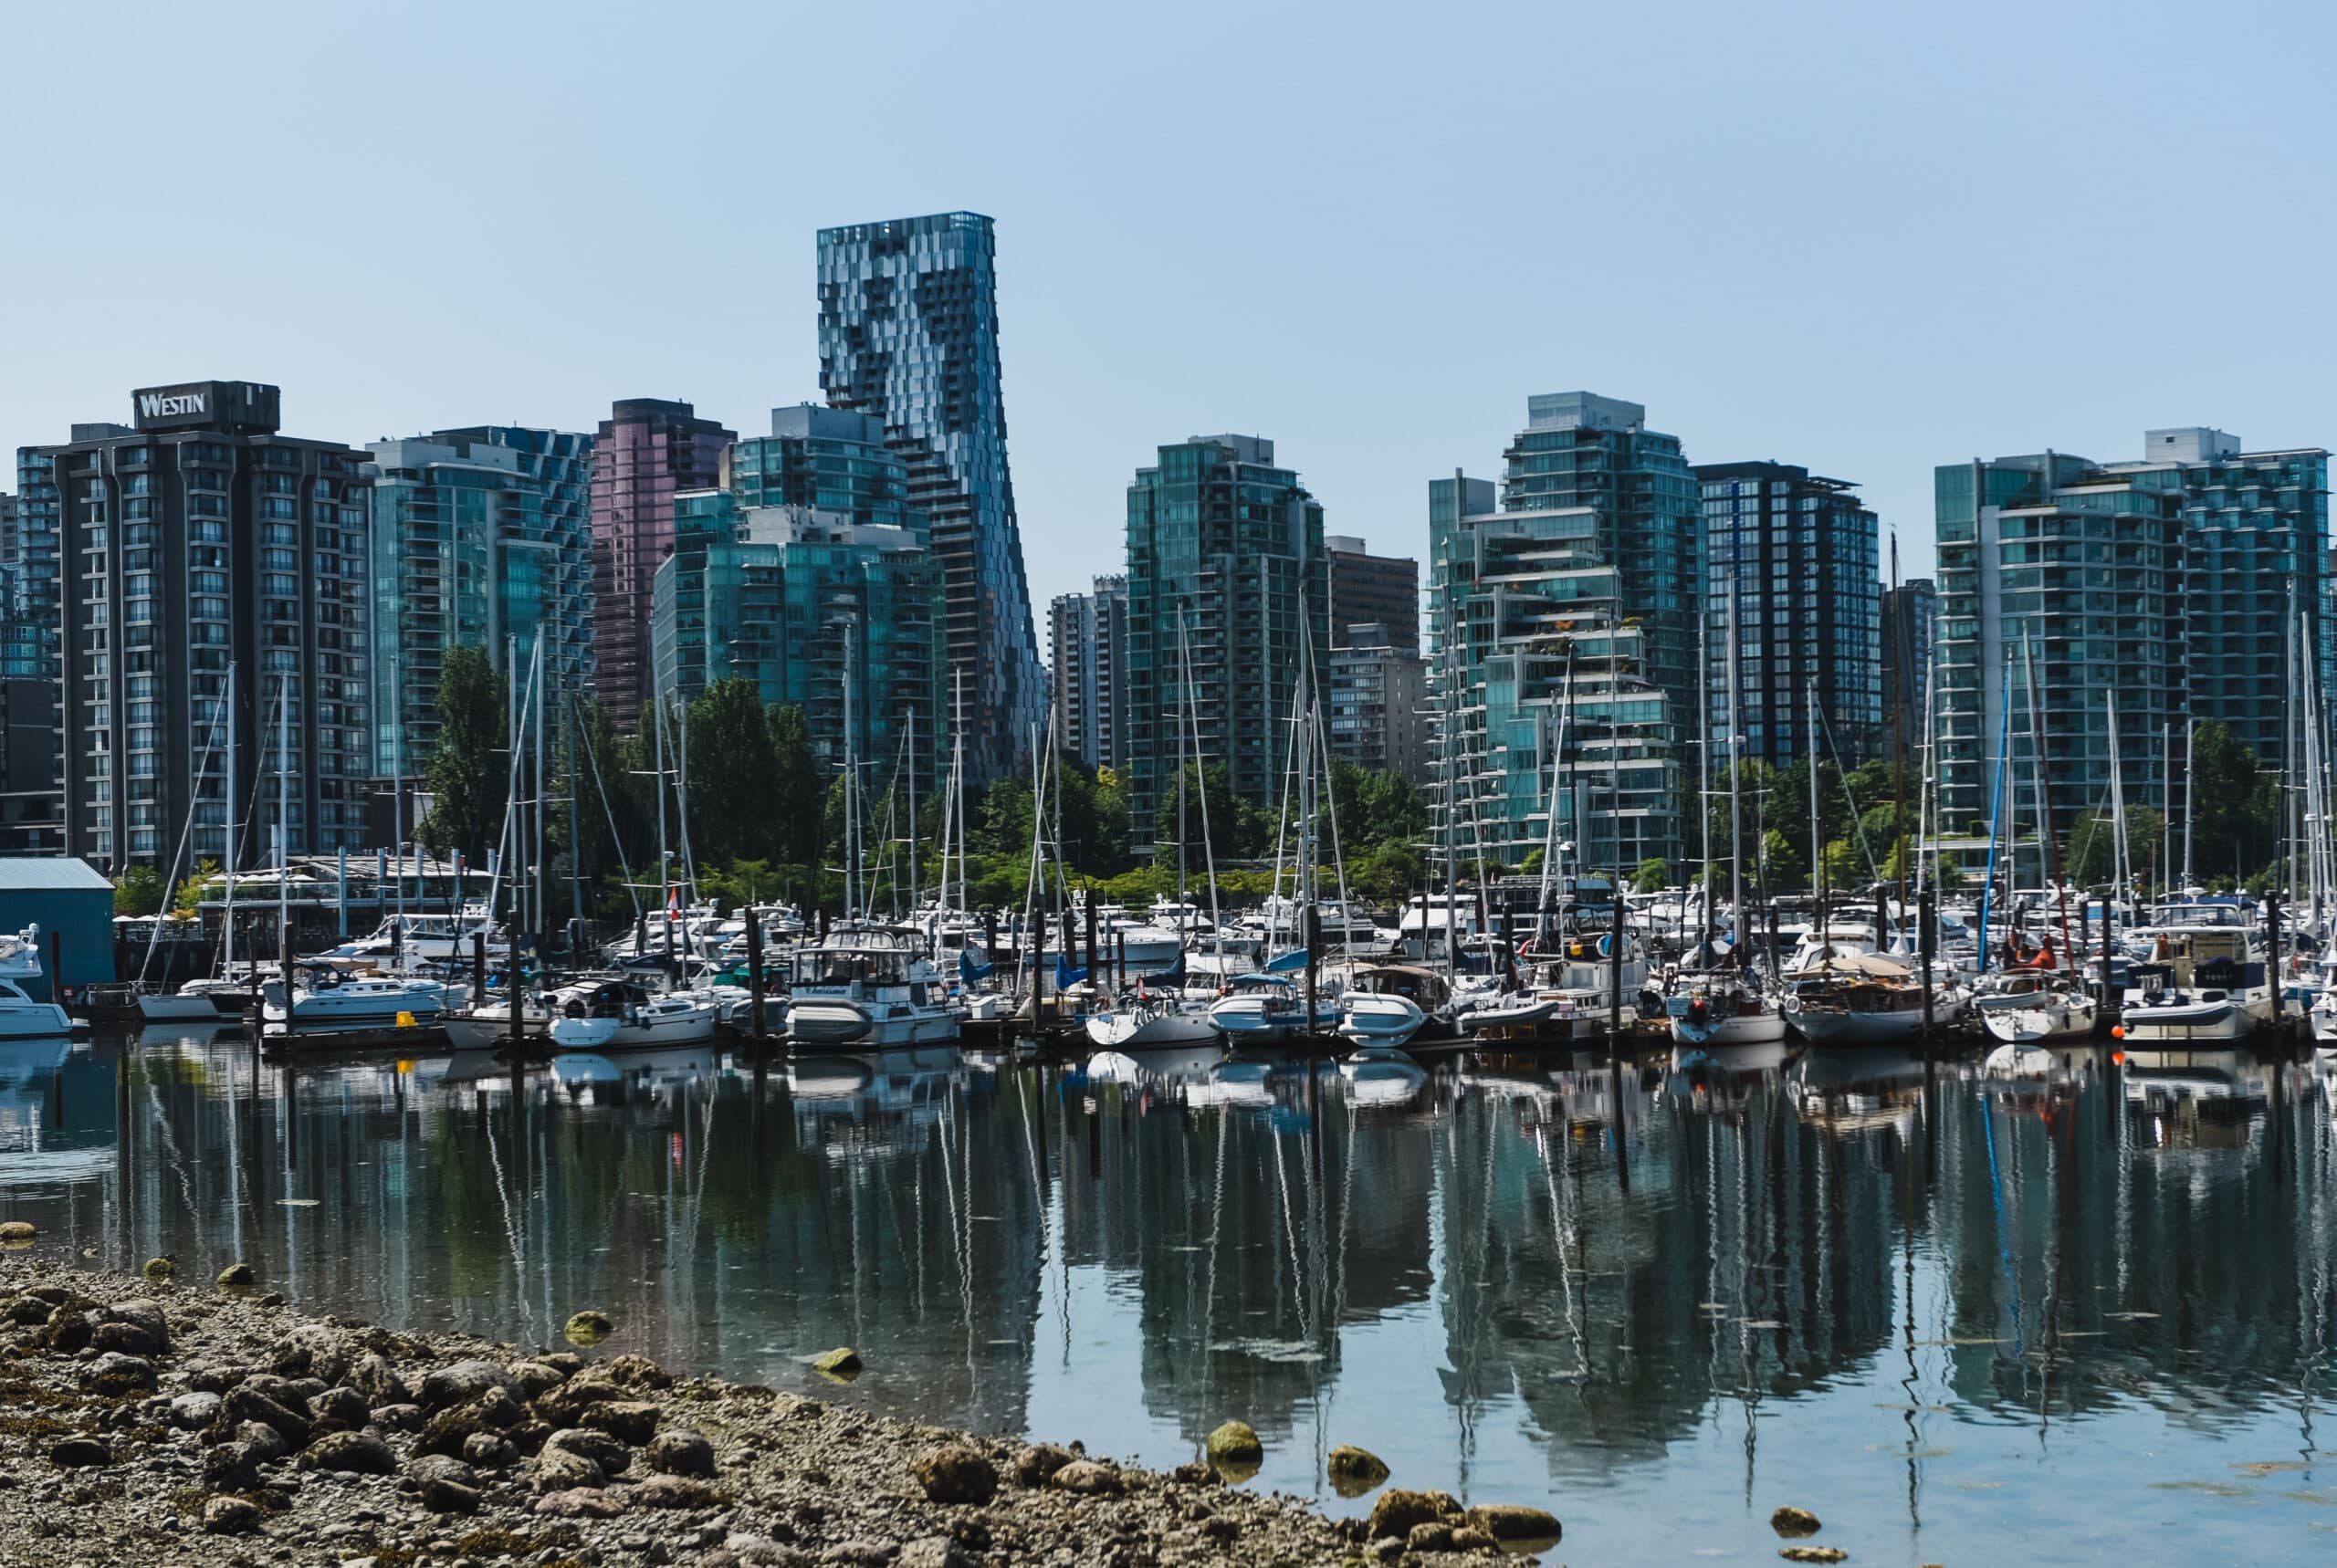 Tall buildings and boat marina in Vancouver, British Columbia, Canada